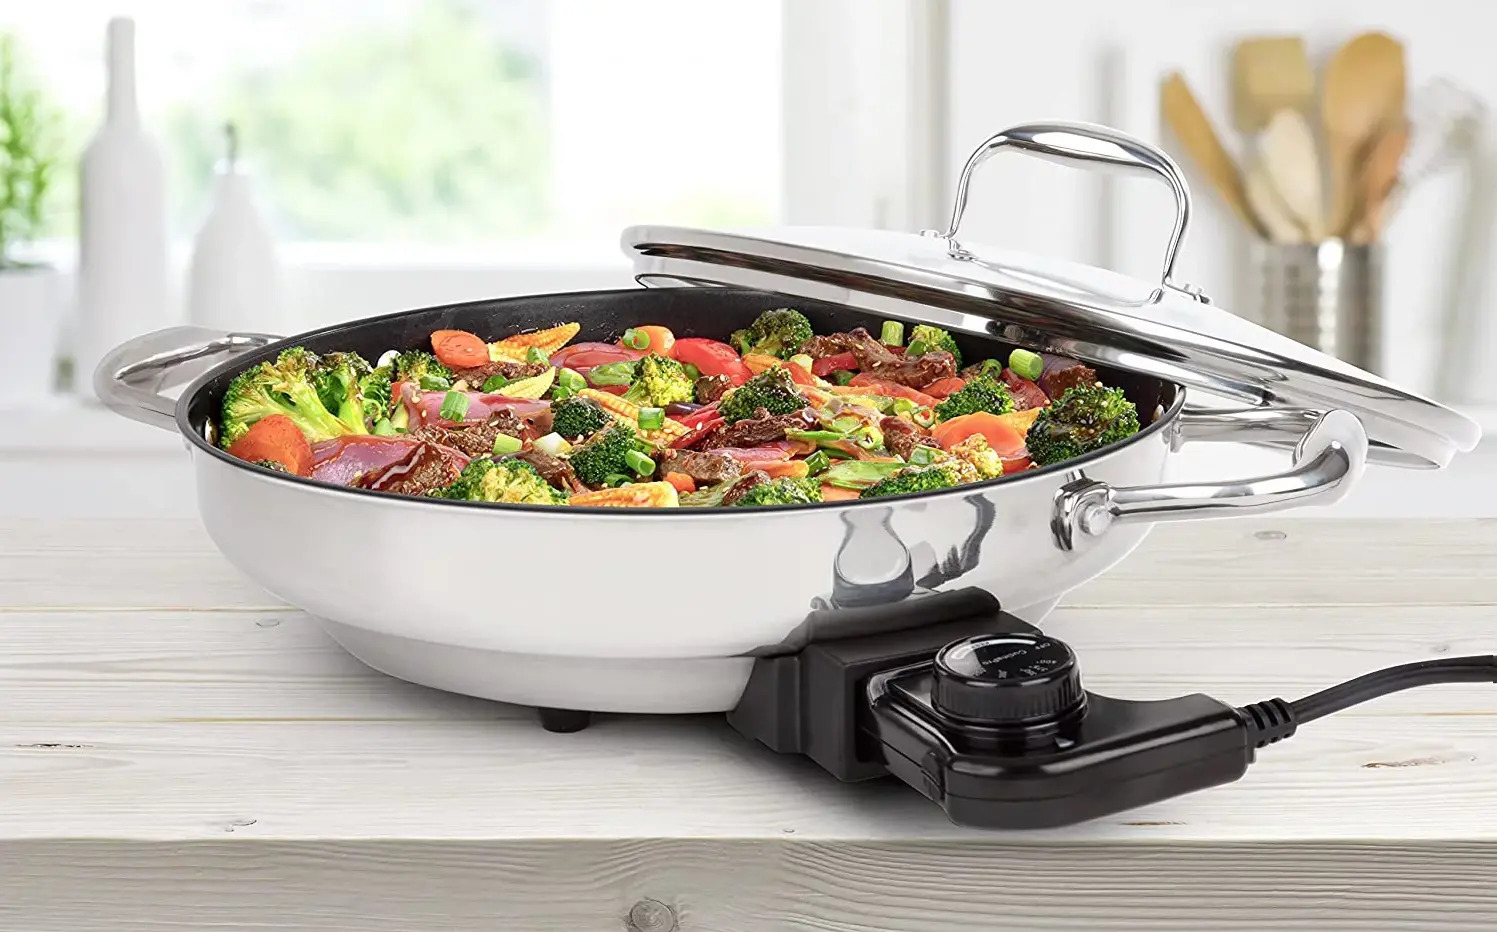 https://storables.com/wp-content/uploads/2023/07/what-is-considered-medium-heat-on-an-electric-skillet-1690186590.jpg